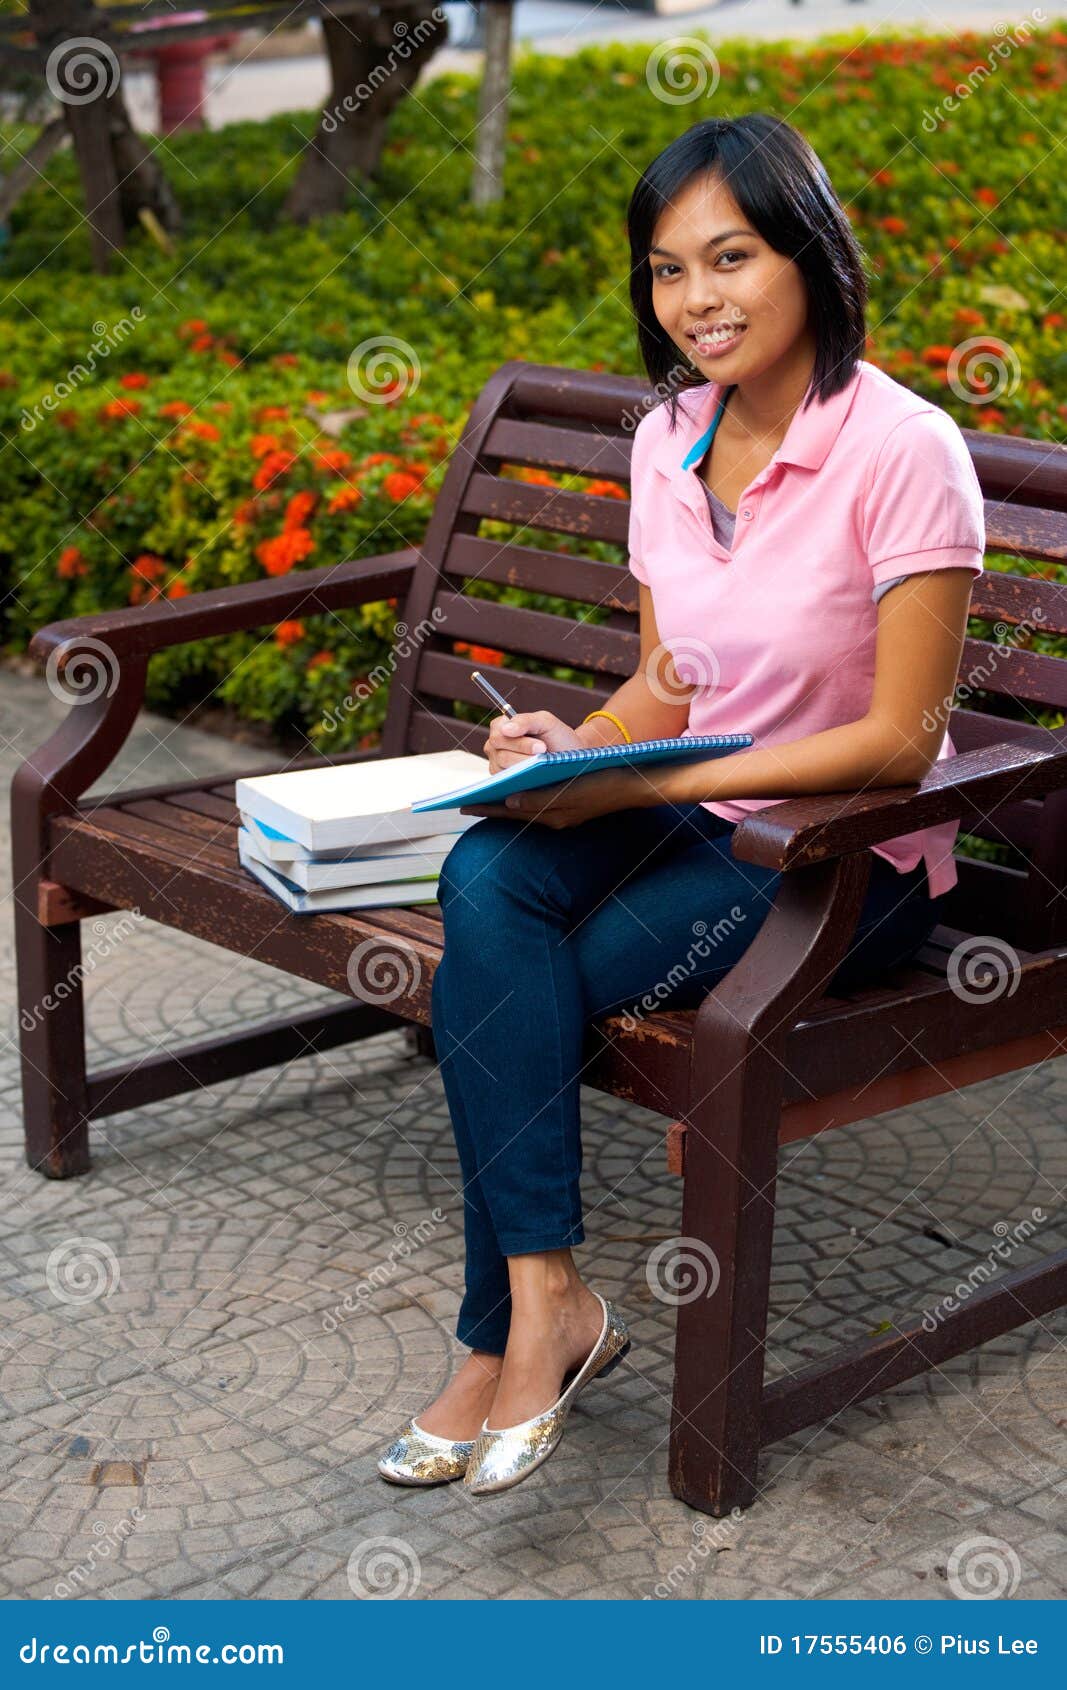 Cute College Student Bench Flowers Notepad Stock Photo - Image of copy